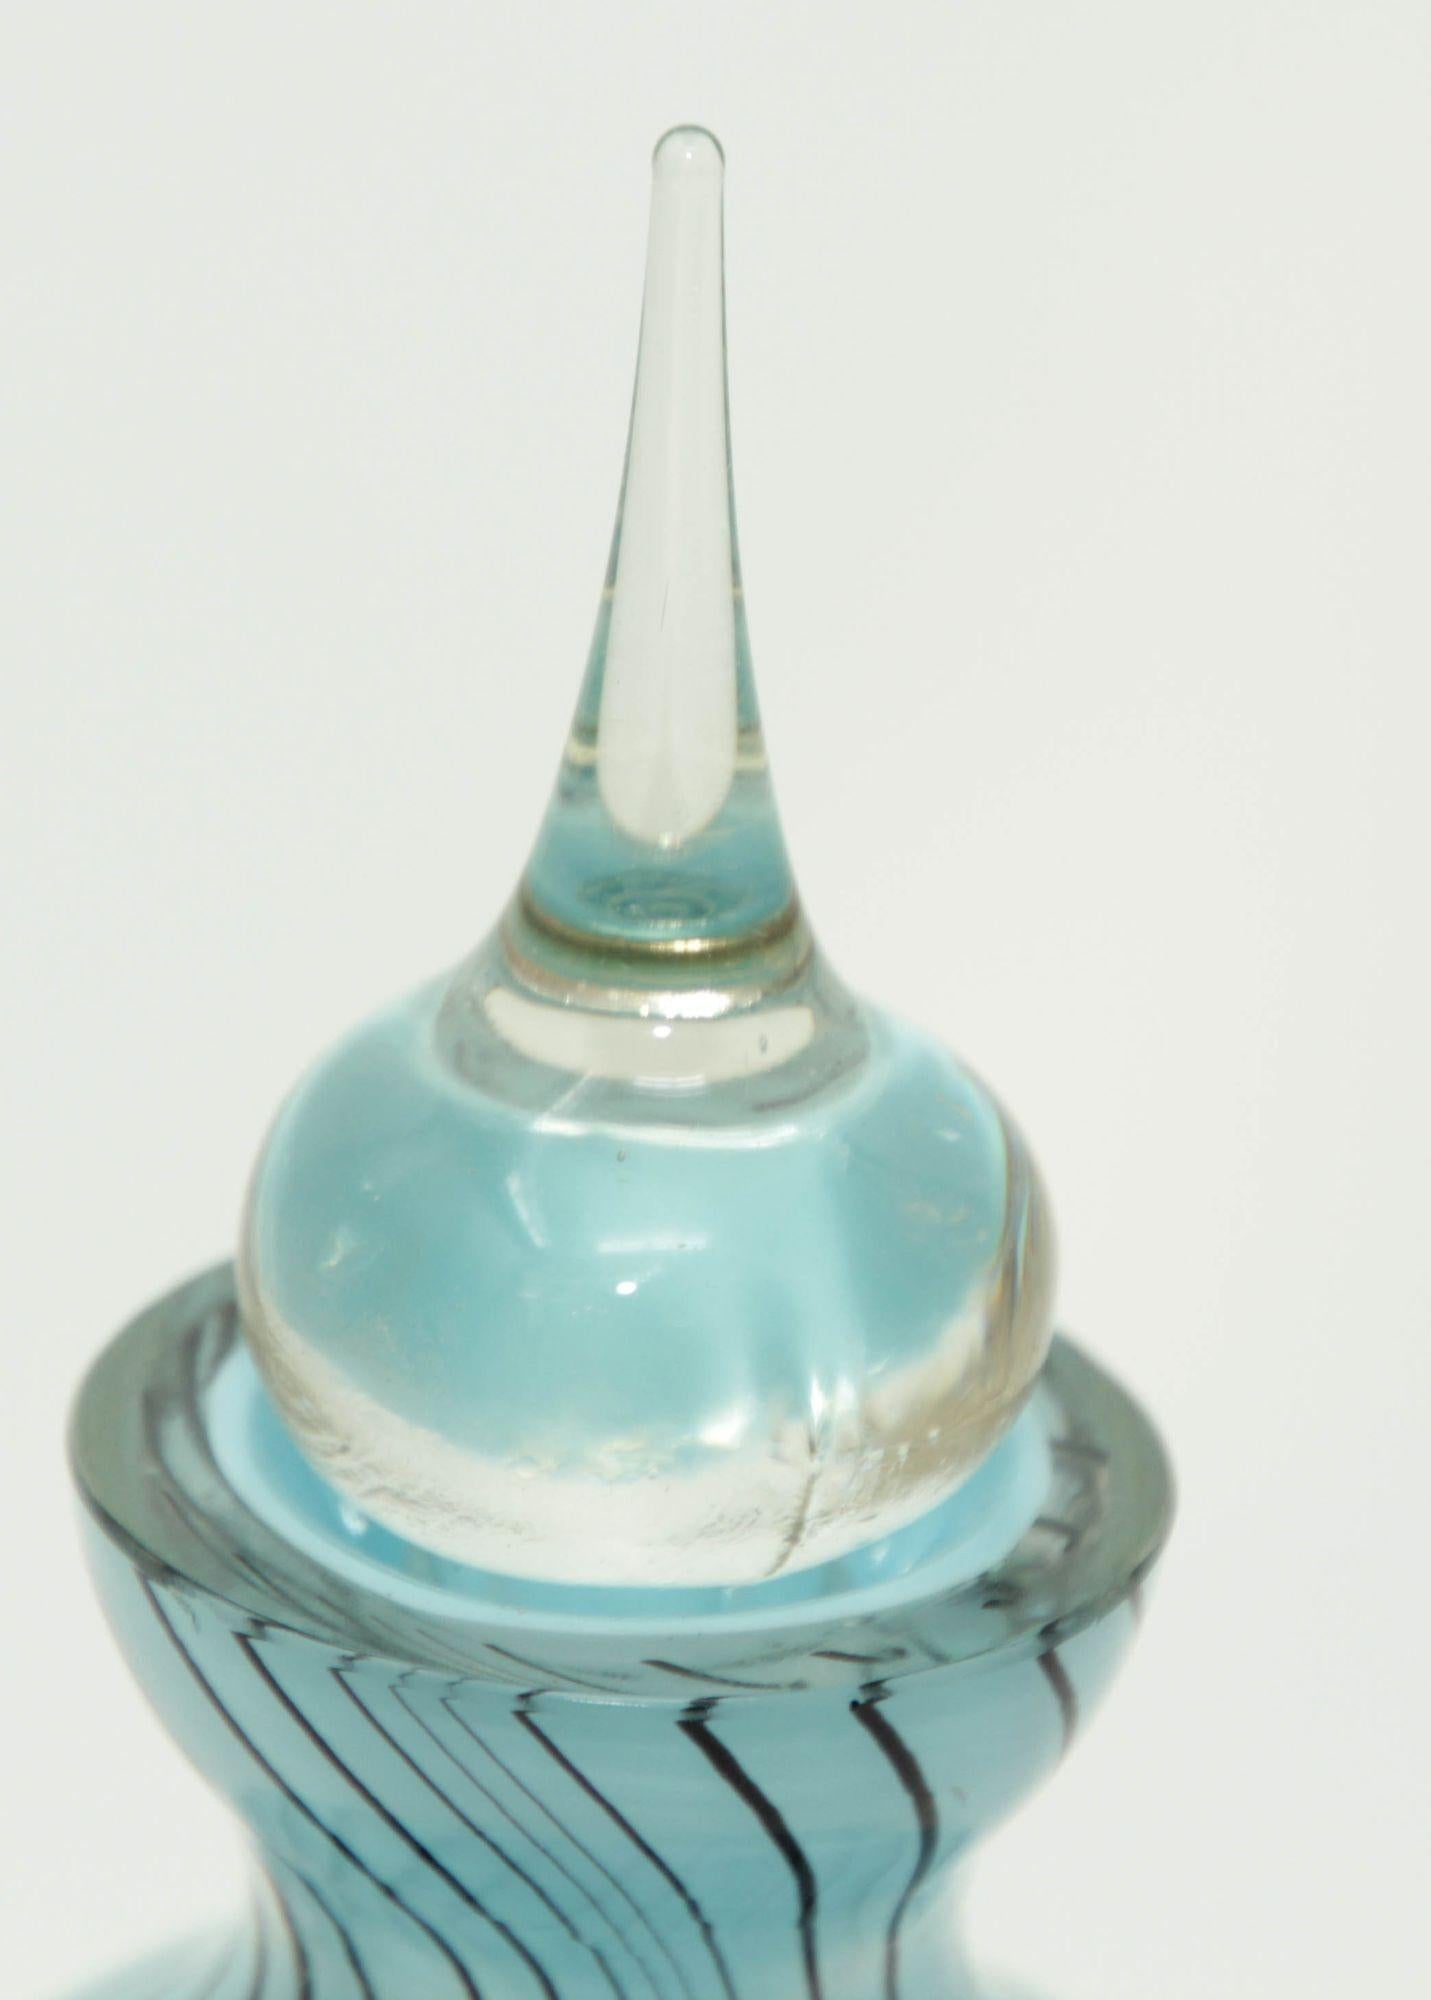 Vintage Murano art glass perfume bottle with original stopper in light sky blue with black stripes and a clear stopper.
Hand Blown glass in blue and black swirl.
The perfume bottle has it's original long stopper with a beautiful droplet shaped